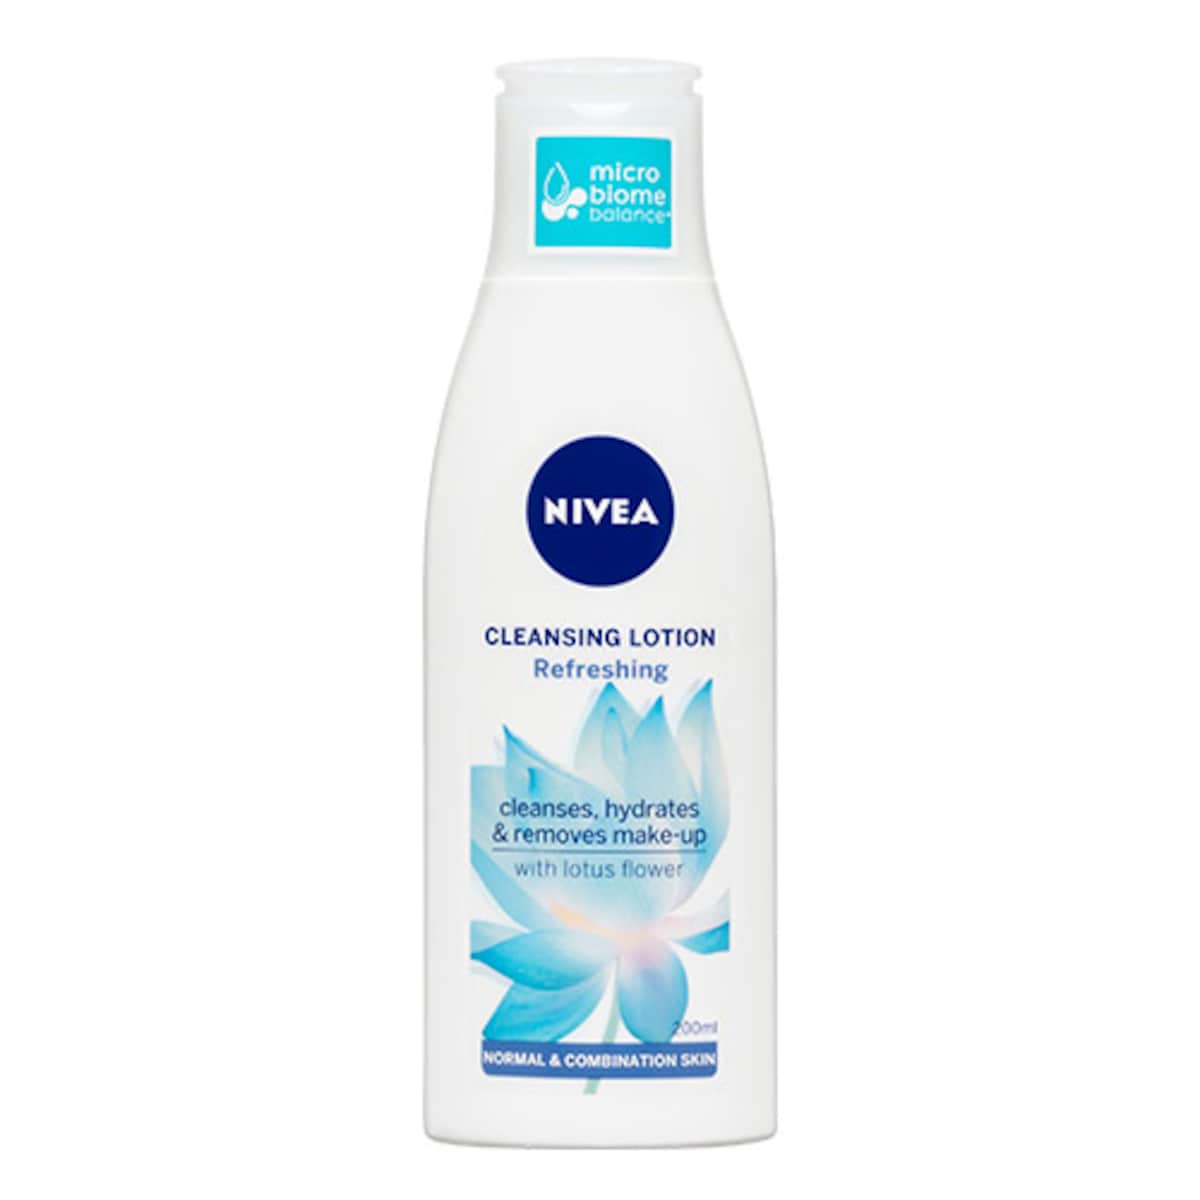 Nivea Refreshing Cleansing Lotion with Lotus Flower 200ml